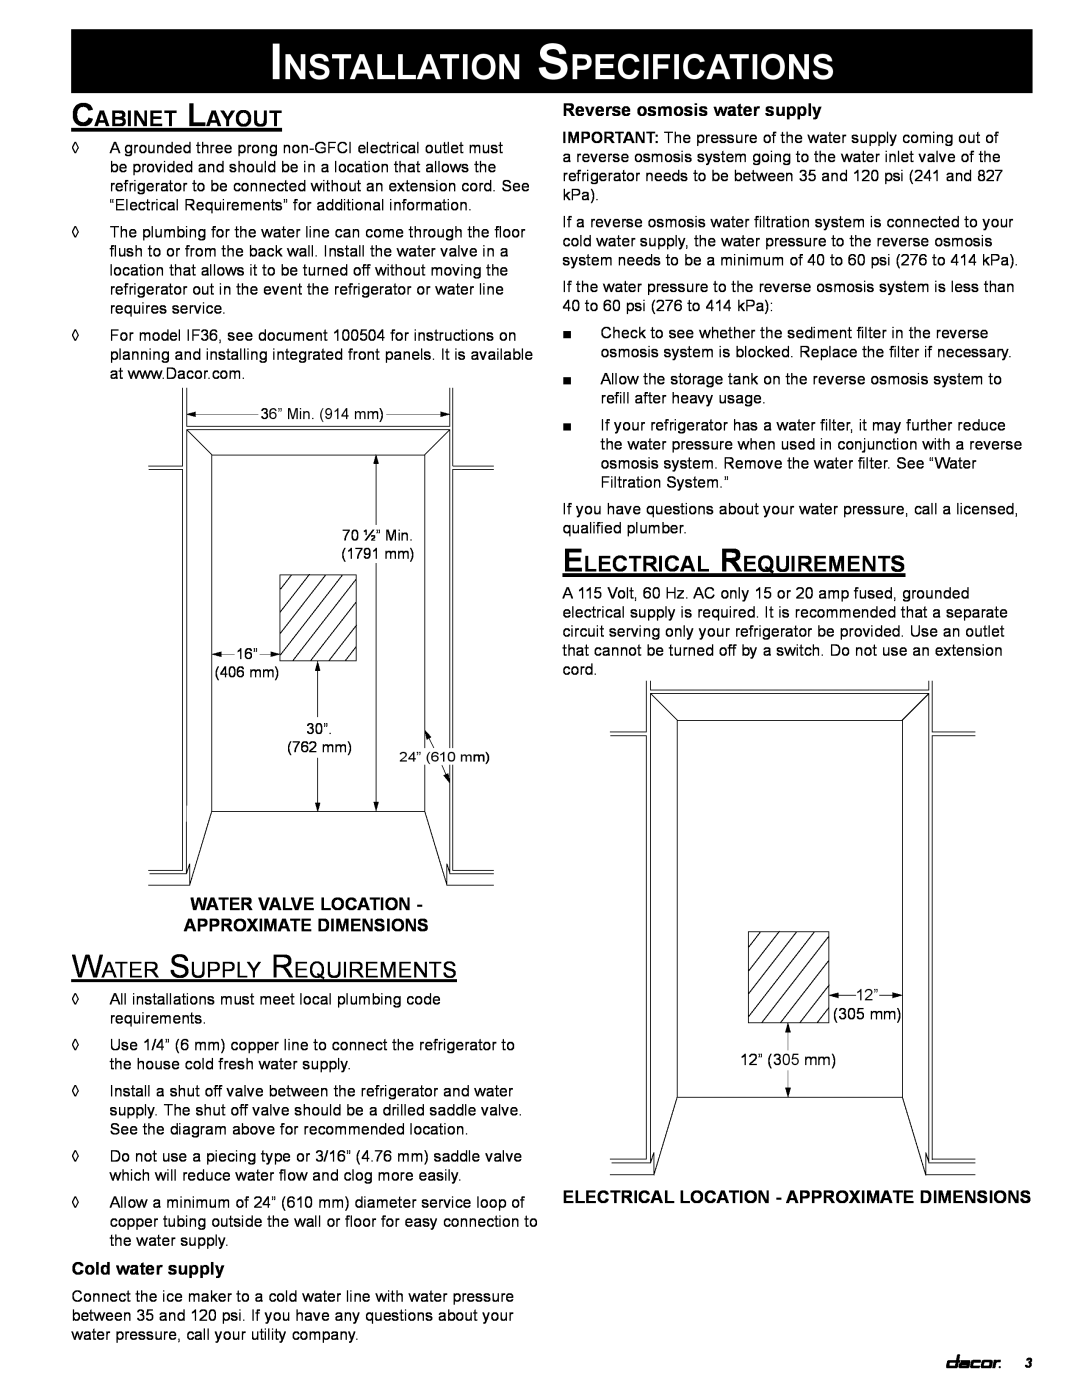 Dacor IF36BNDF Cabinet Layout, Electrical Requirements, Water valve Location Approximate Dimensions, Cold water supply 